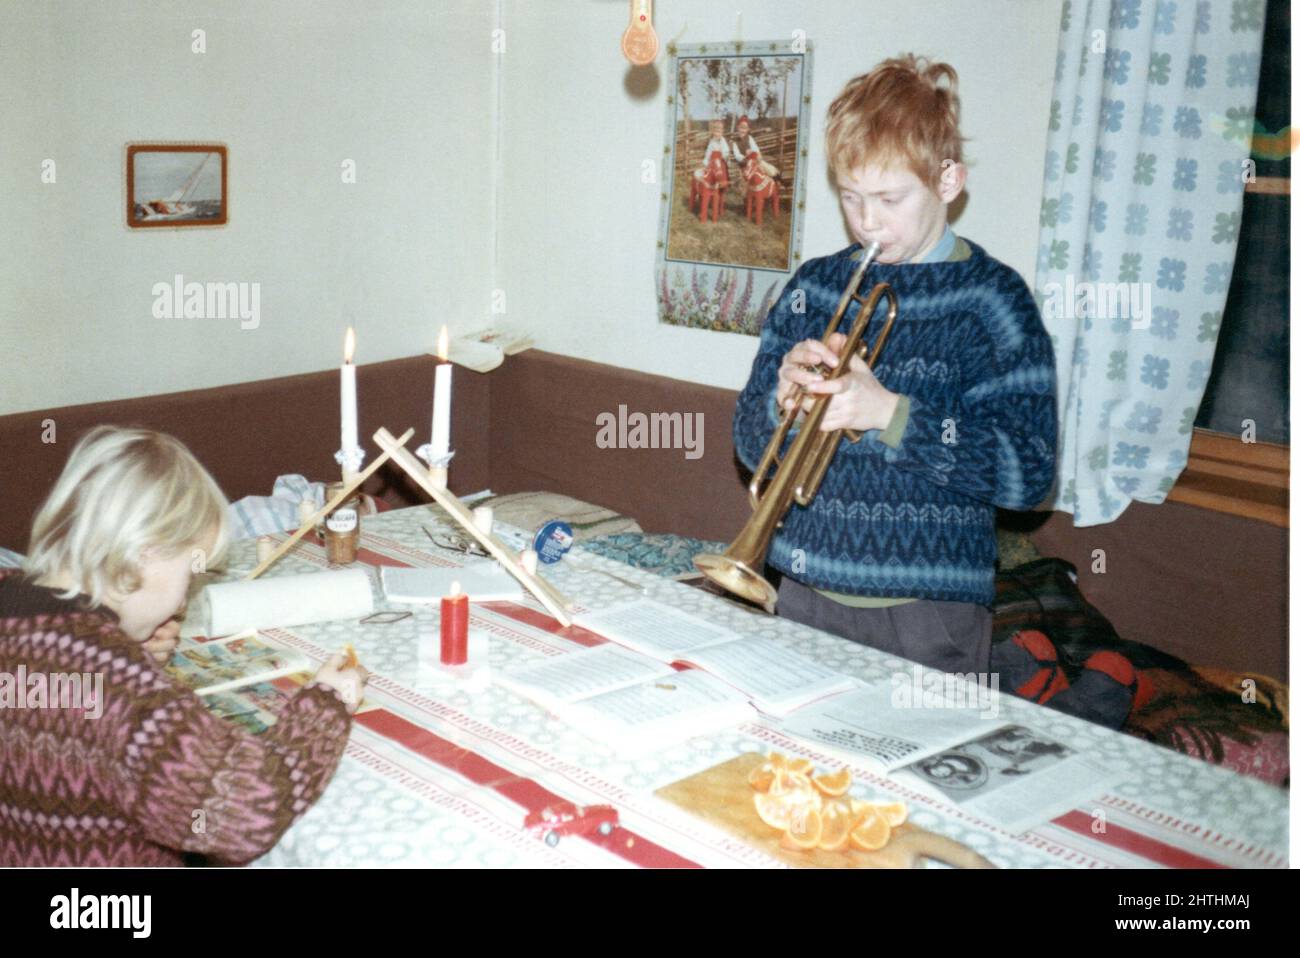 1960's authentic vintage photograph of boy playing trumpet and girl reading, Sweden. Concept of family life, learning, hobbies Stock Photo